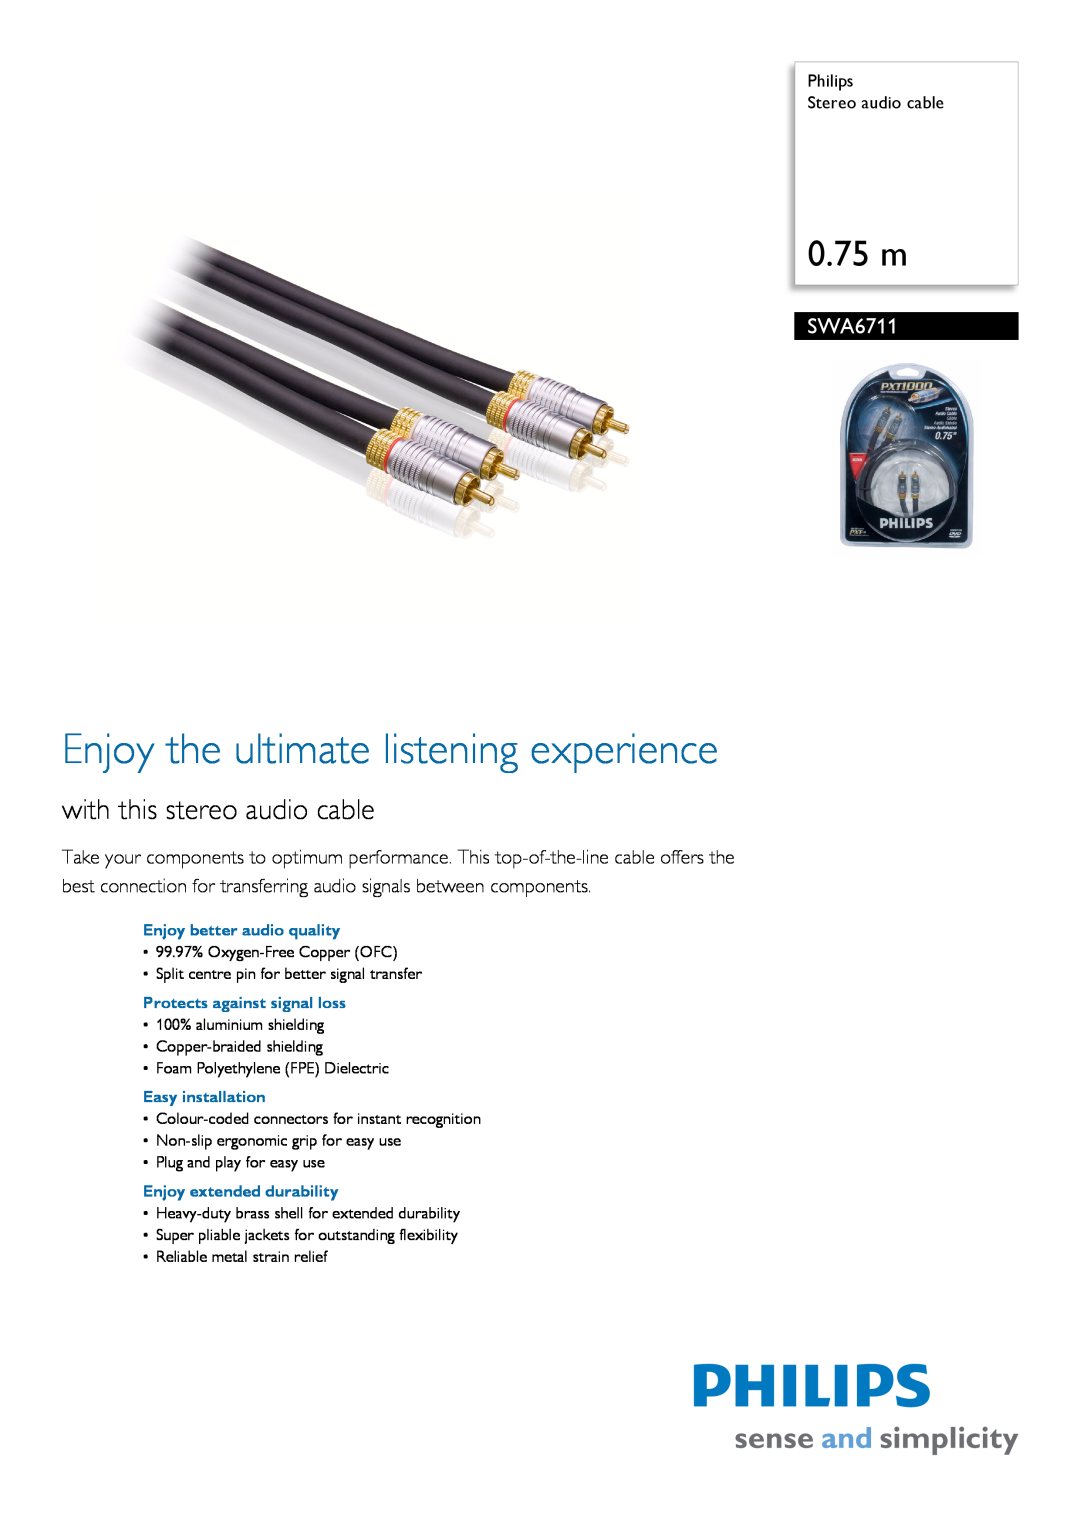 Philips SWA6711/10 manual Philips Stereo audio cable, Enjoy the ultimate listening experience, 0.75 m 